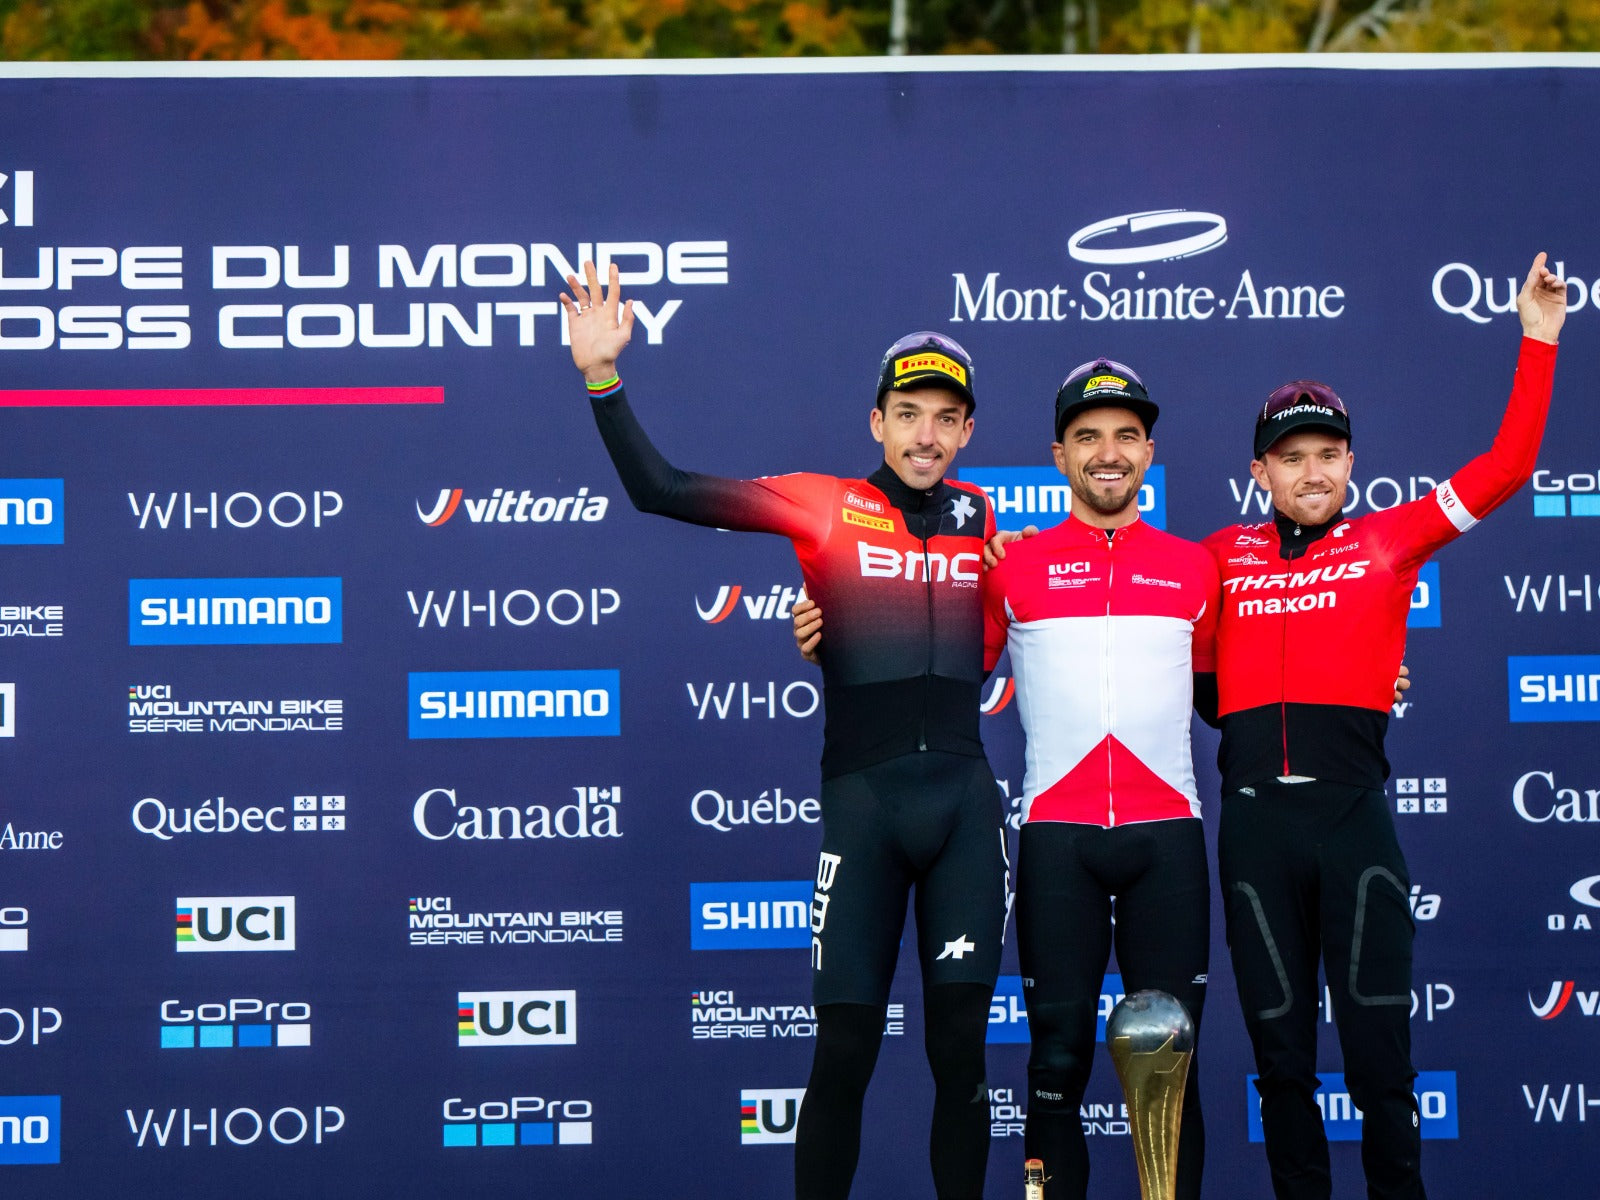 Team BMC successfully achieved all objectives at Mont-Sainte-Anne, the final World Cup of the season